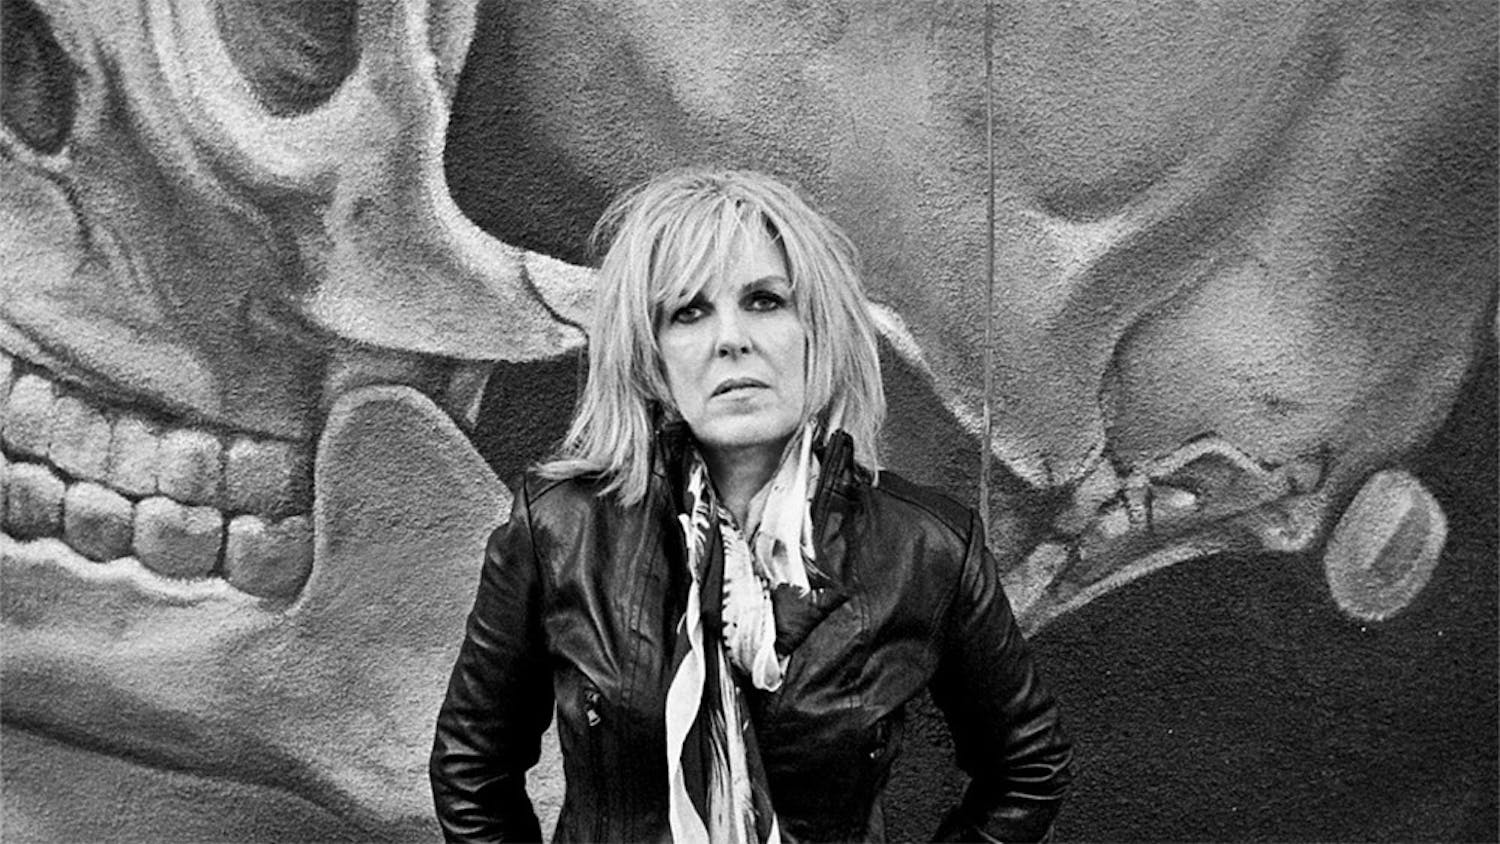 American musician Lucinda Williams will be performing at the Bluebird on Saturday.  Her current tour will conclude in mid-July.